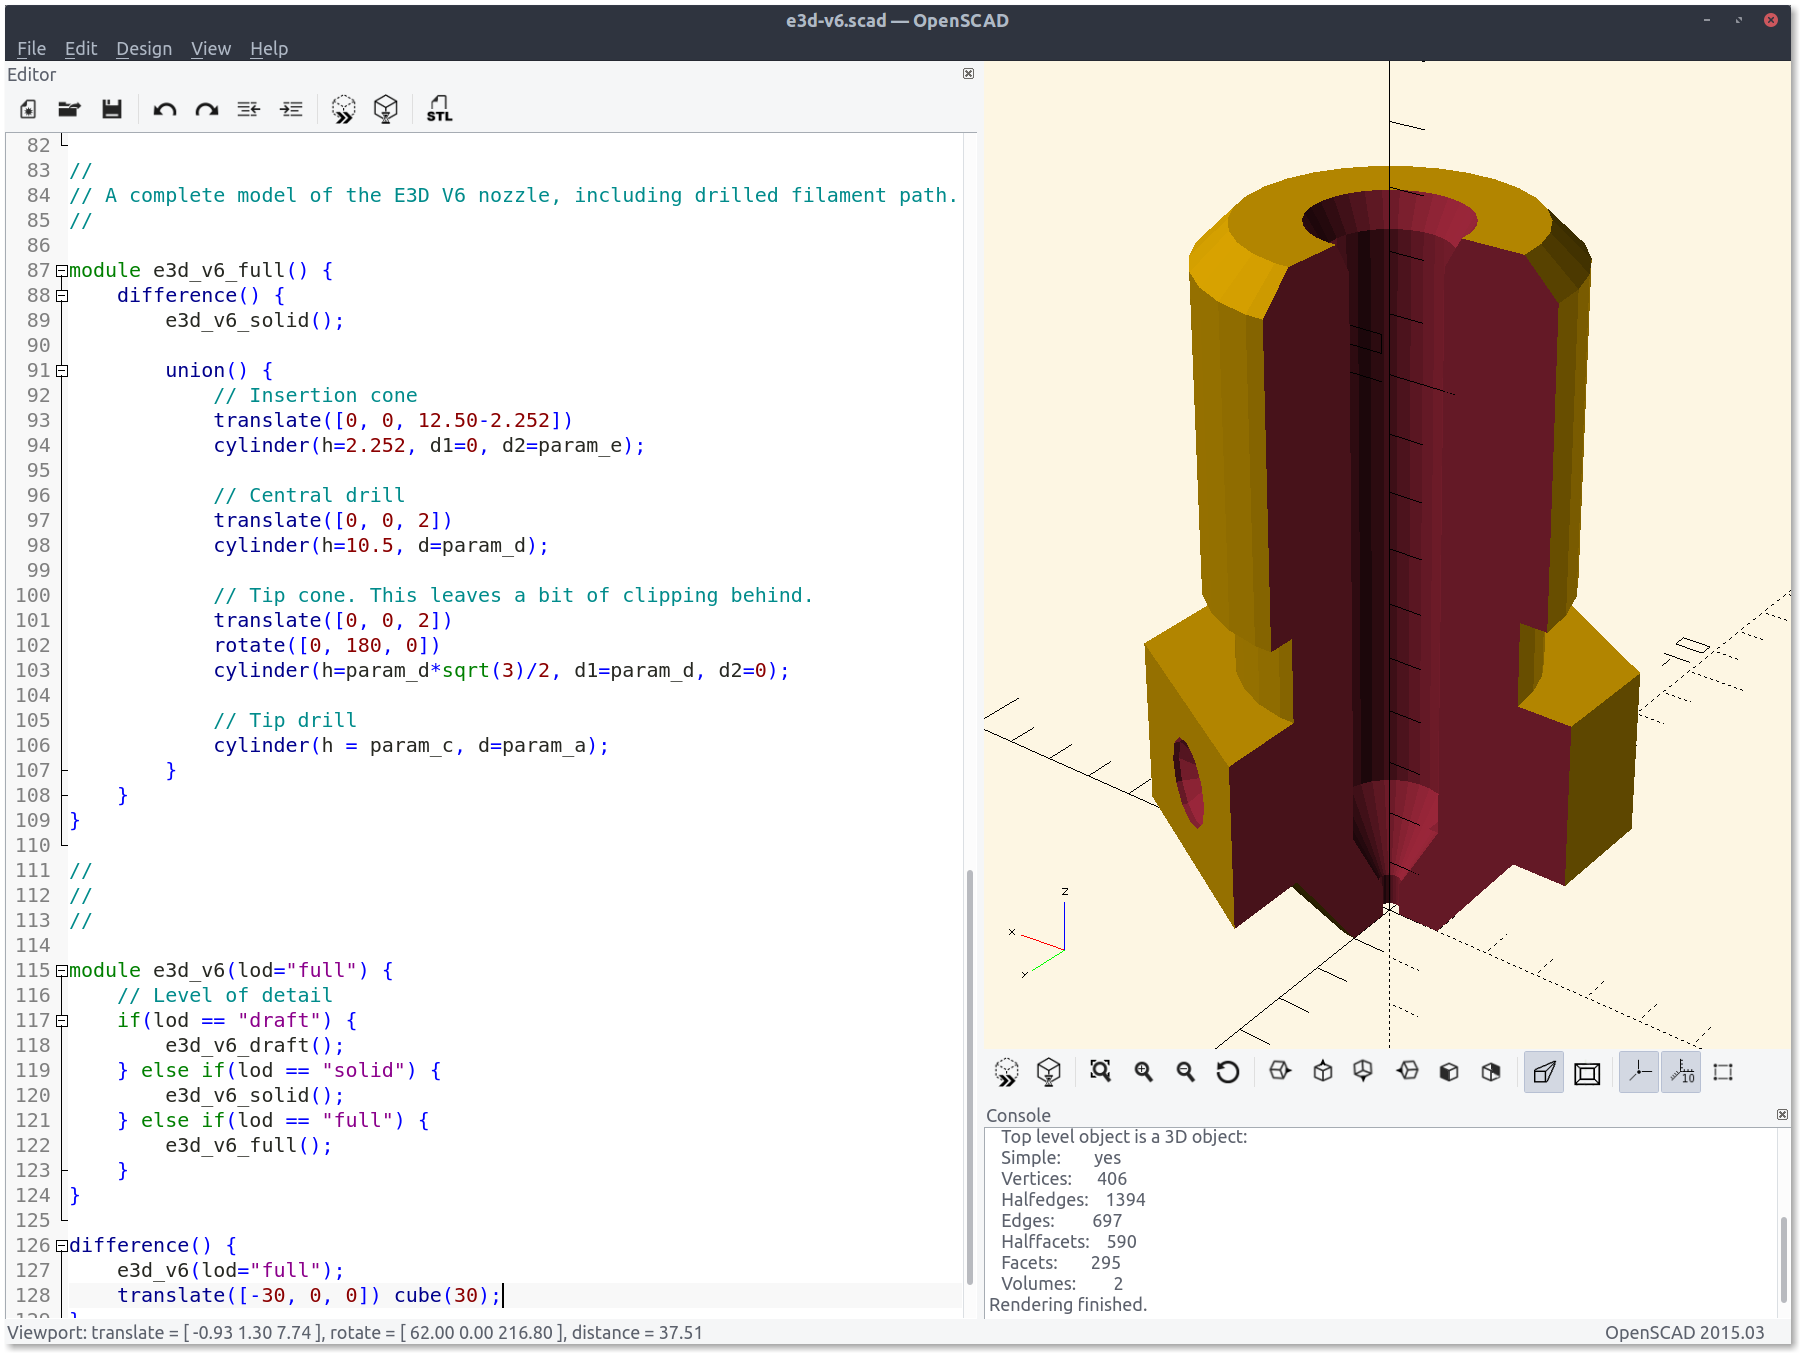 OpenSCAD interface, showing a render of the E3D V6 nozzle and part of the code that generates it